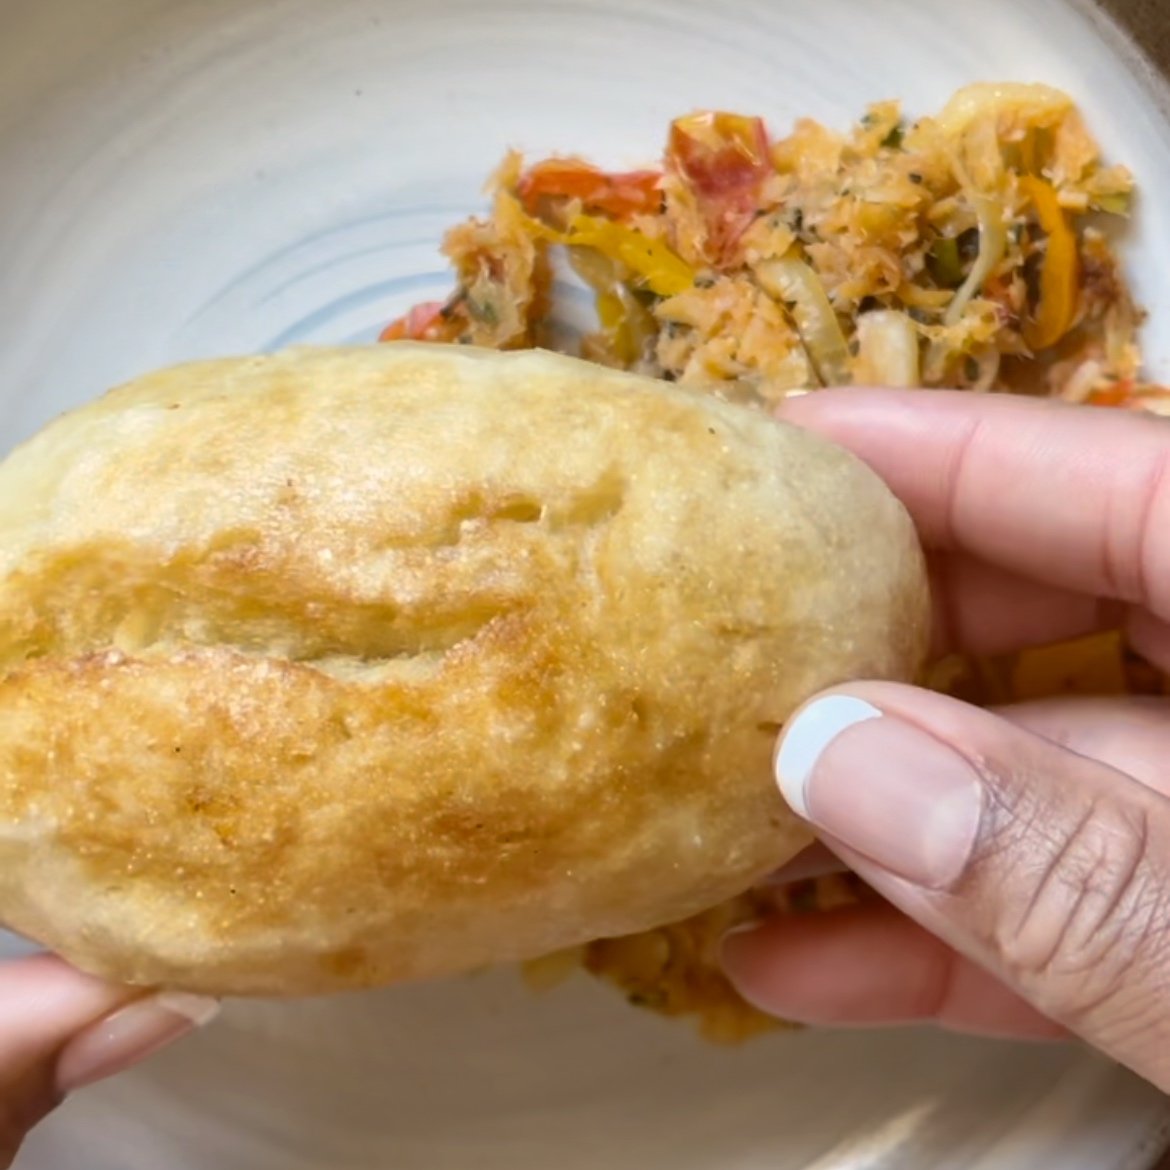 Fingers holding a golden brown fried duff over a plate of saltfish